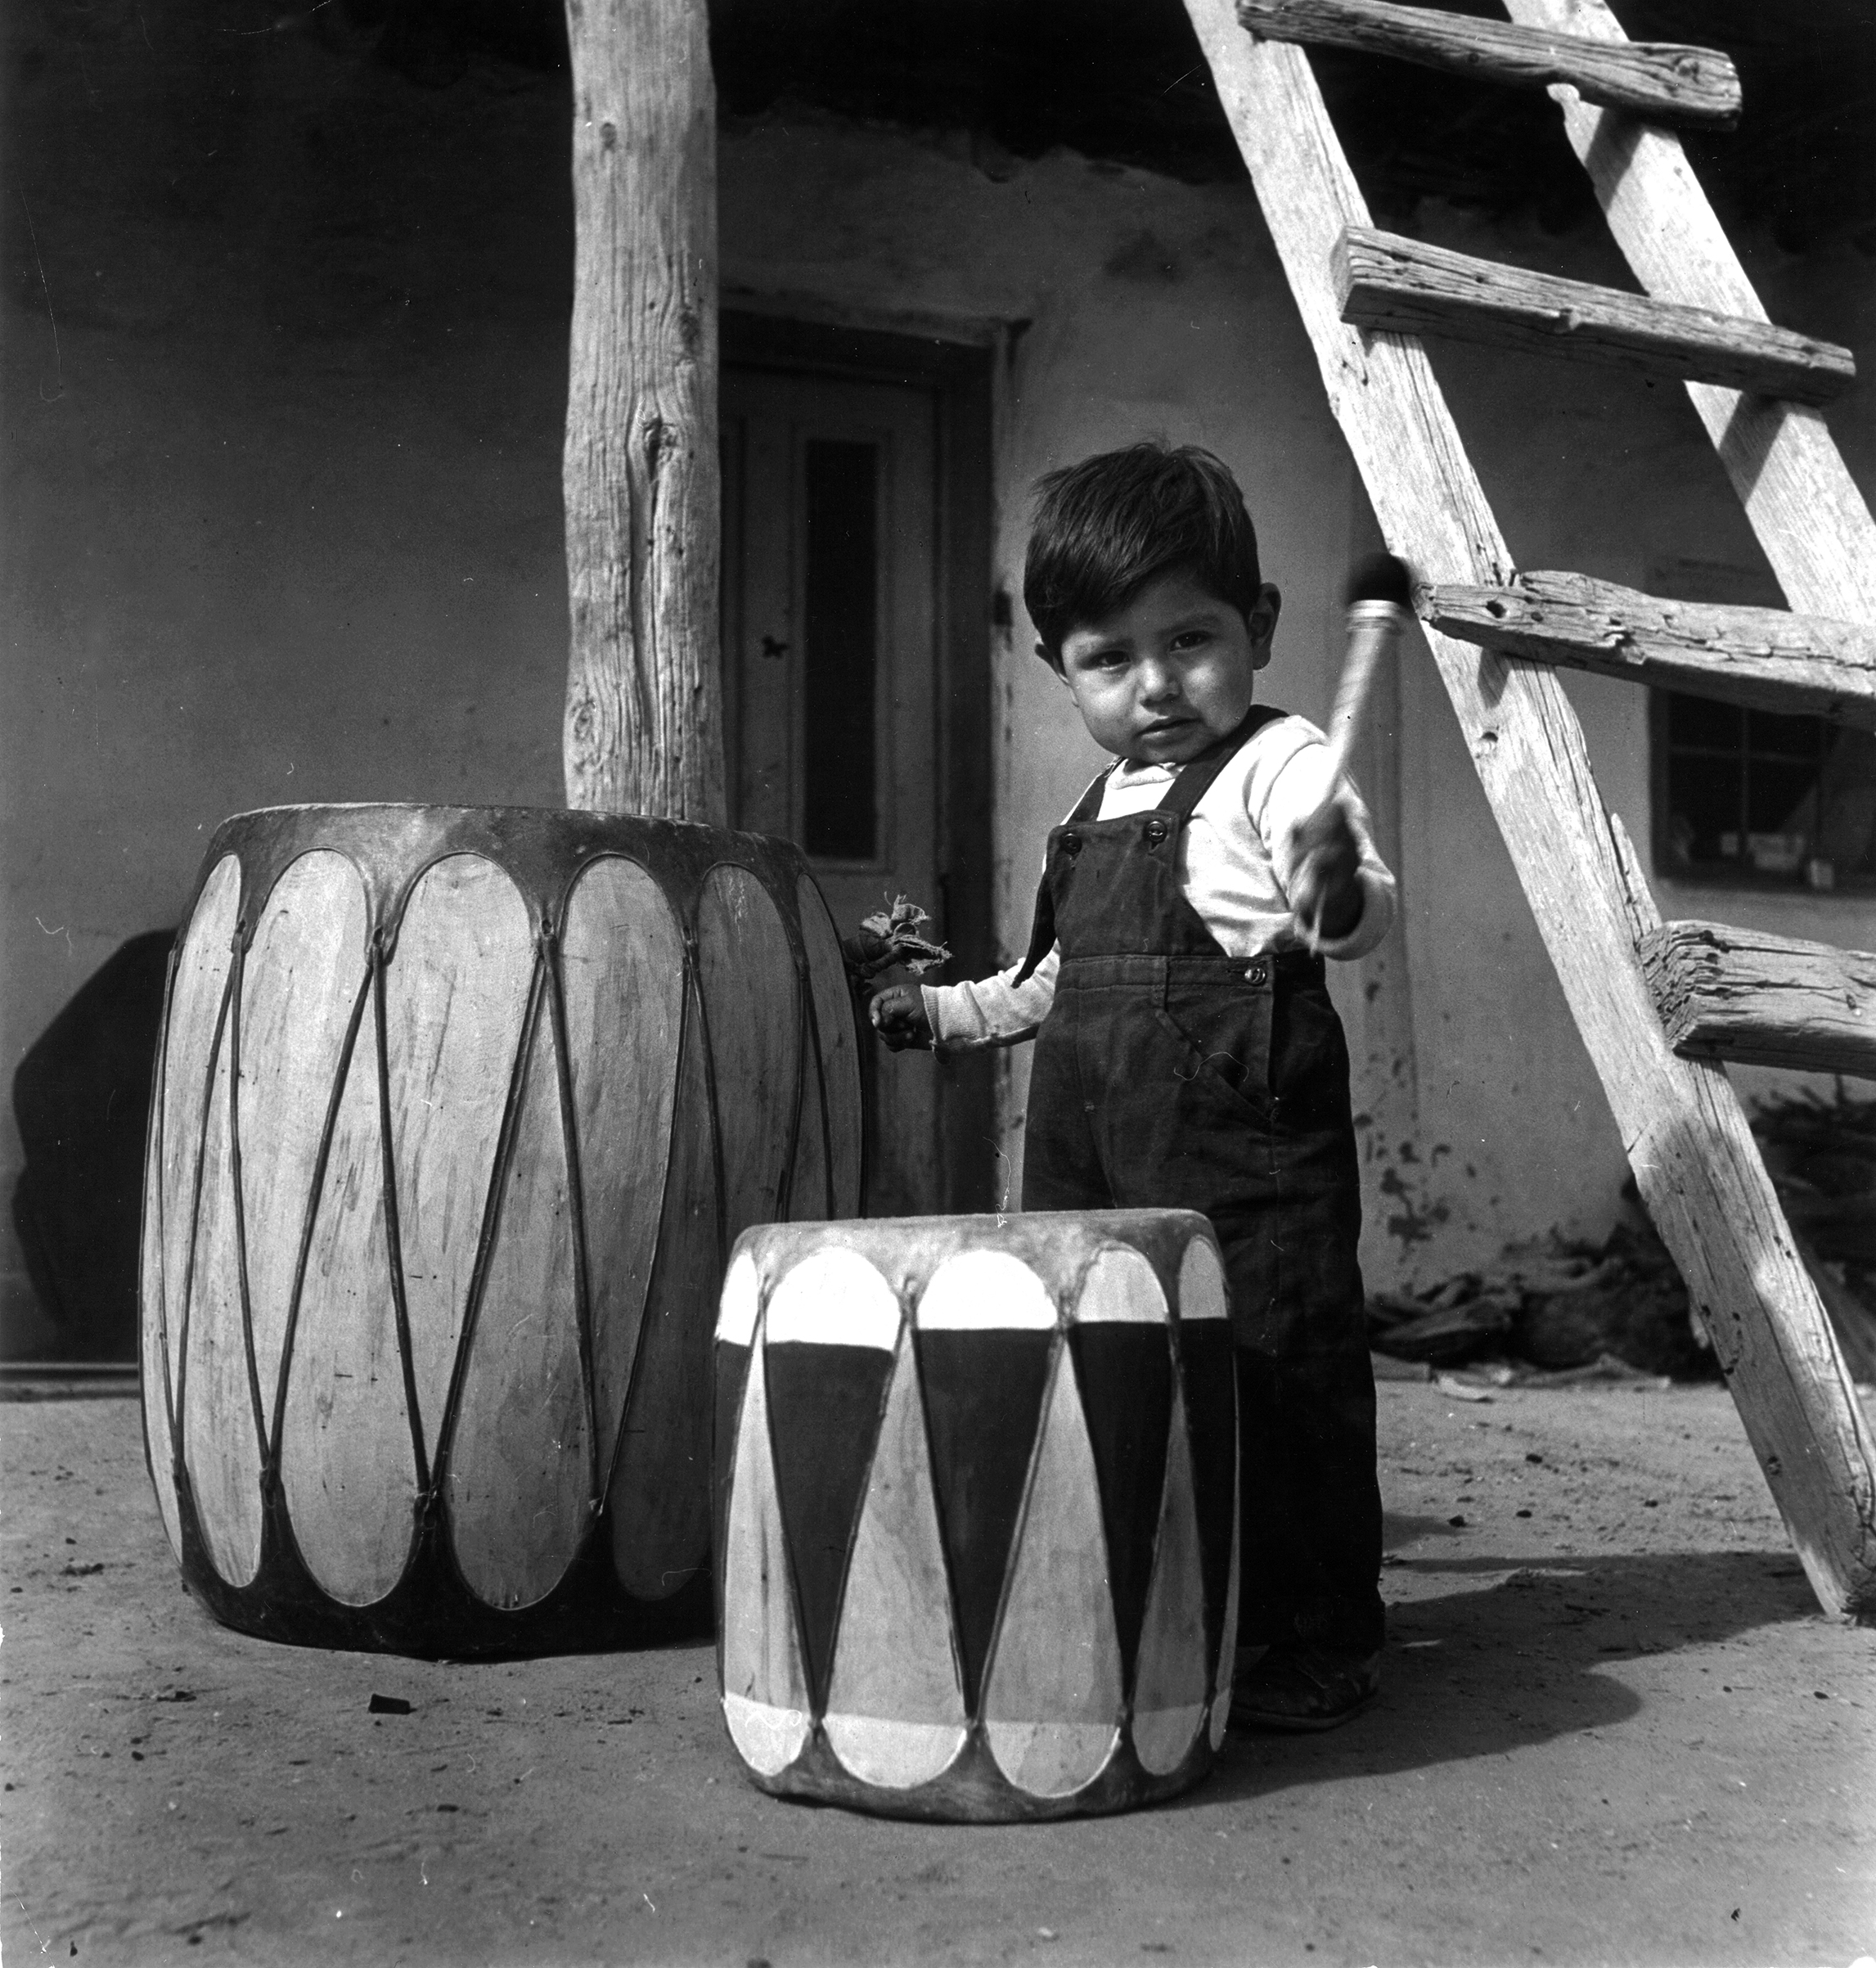 Native American boy of the Chochiti tribe playing drum outside his home, Sante Fe, New Mexico in 1947.